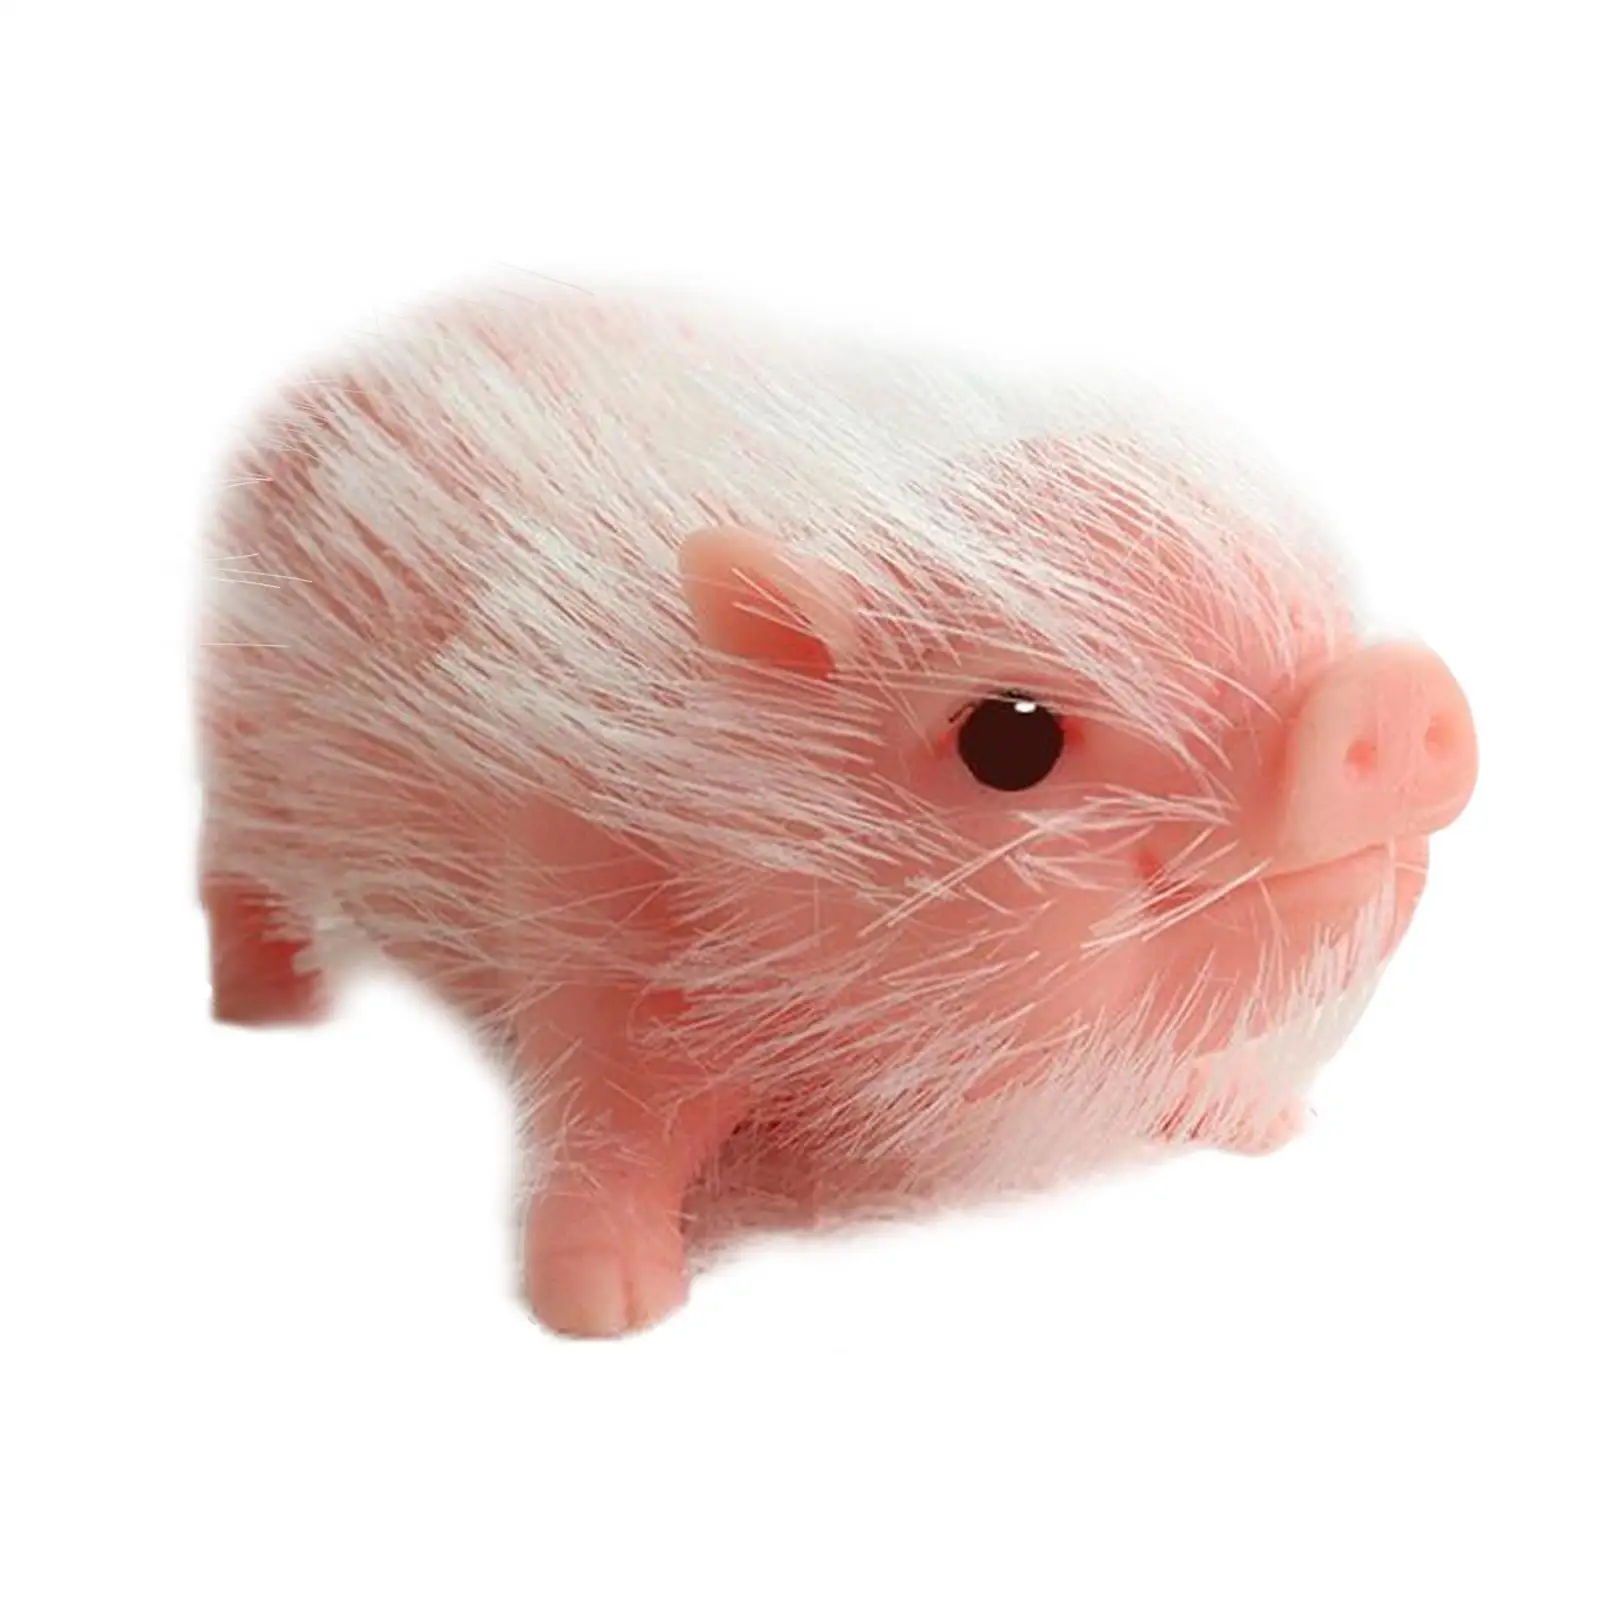 Cute Silicone Piglet Sensort Toy Body Silicon Fake Animals Fake Pets for Home Display Garden Decoration Cosplay Halloween